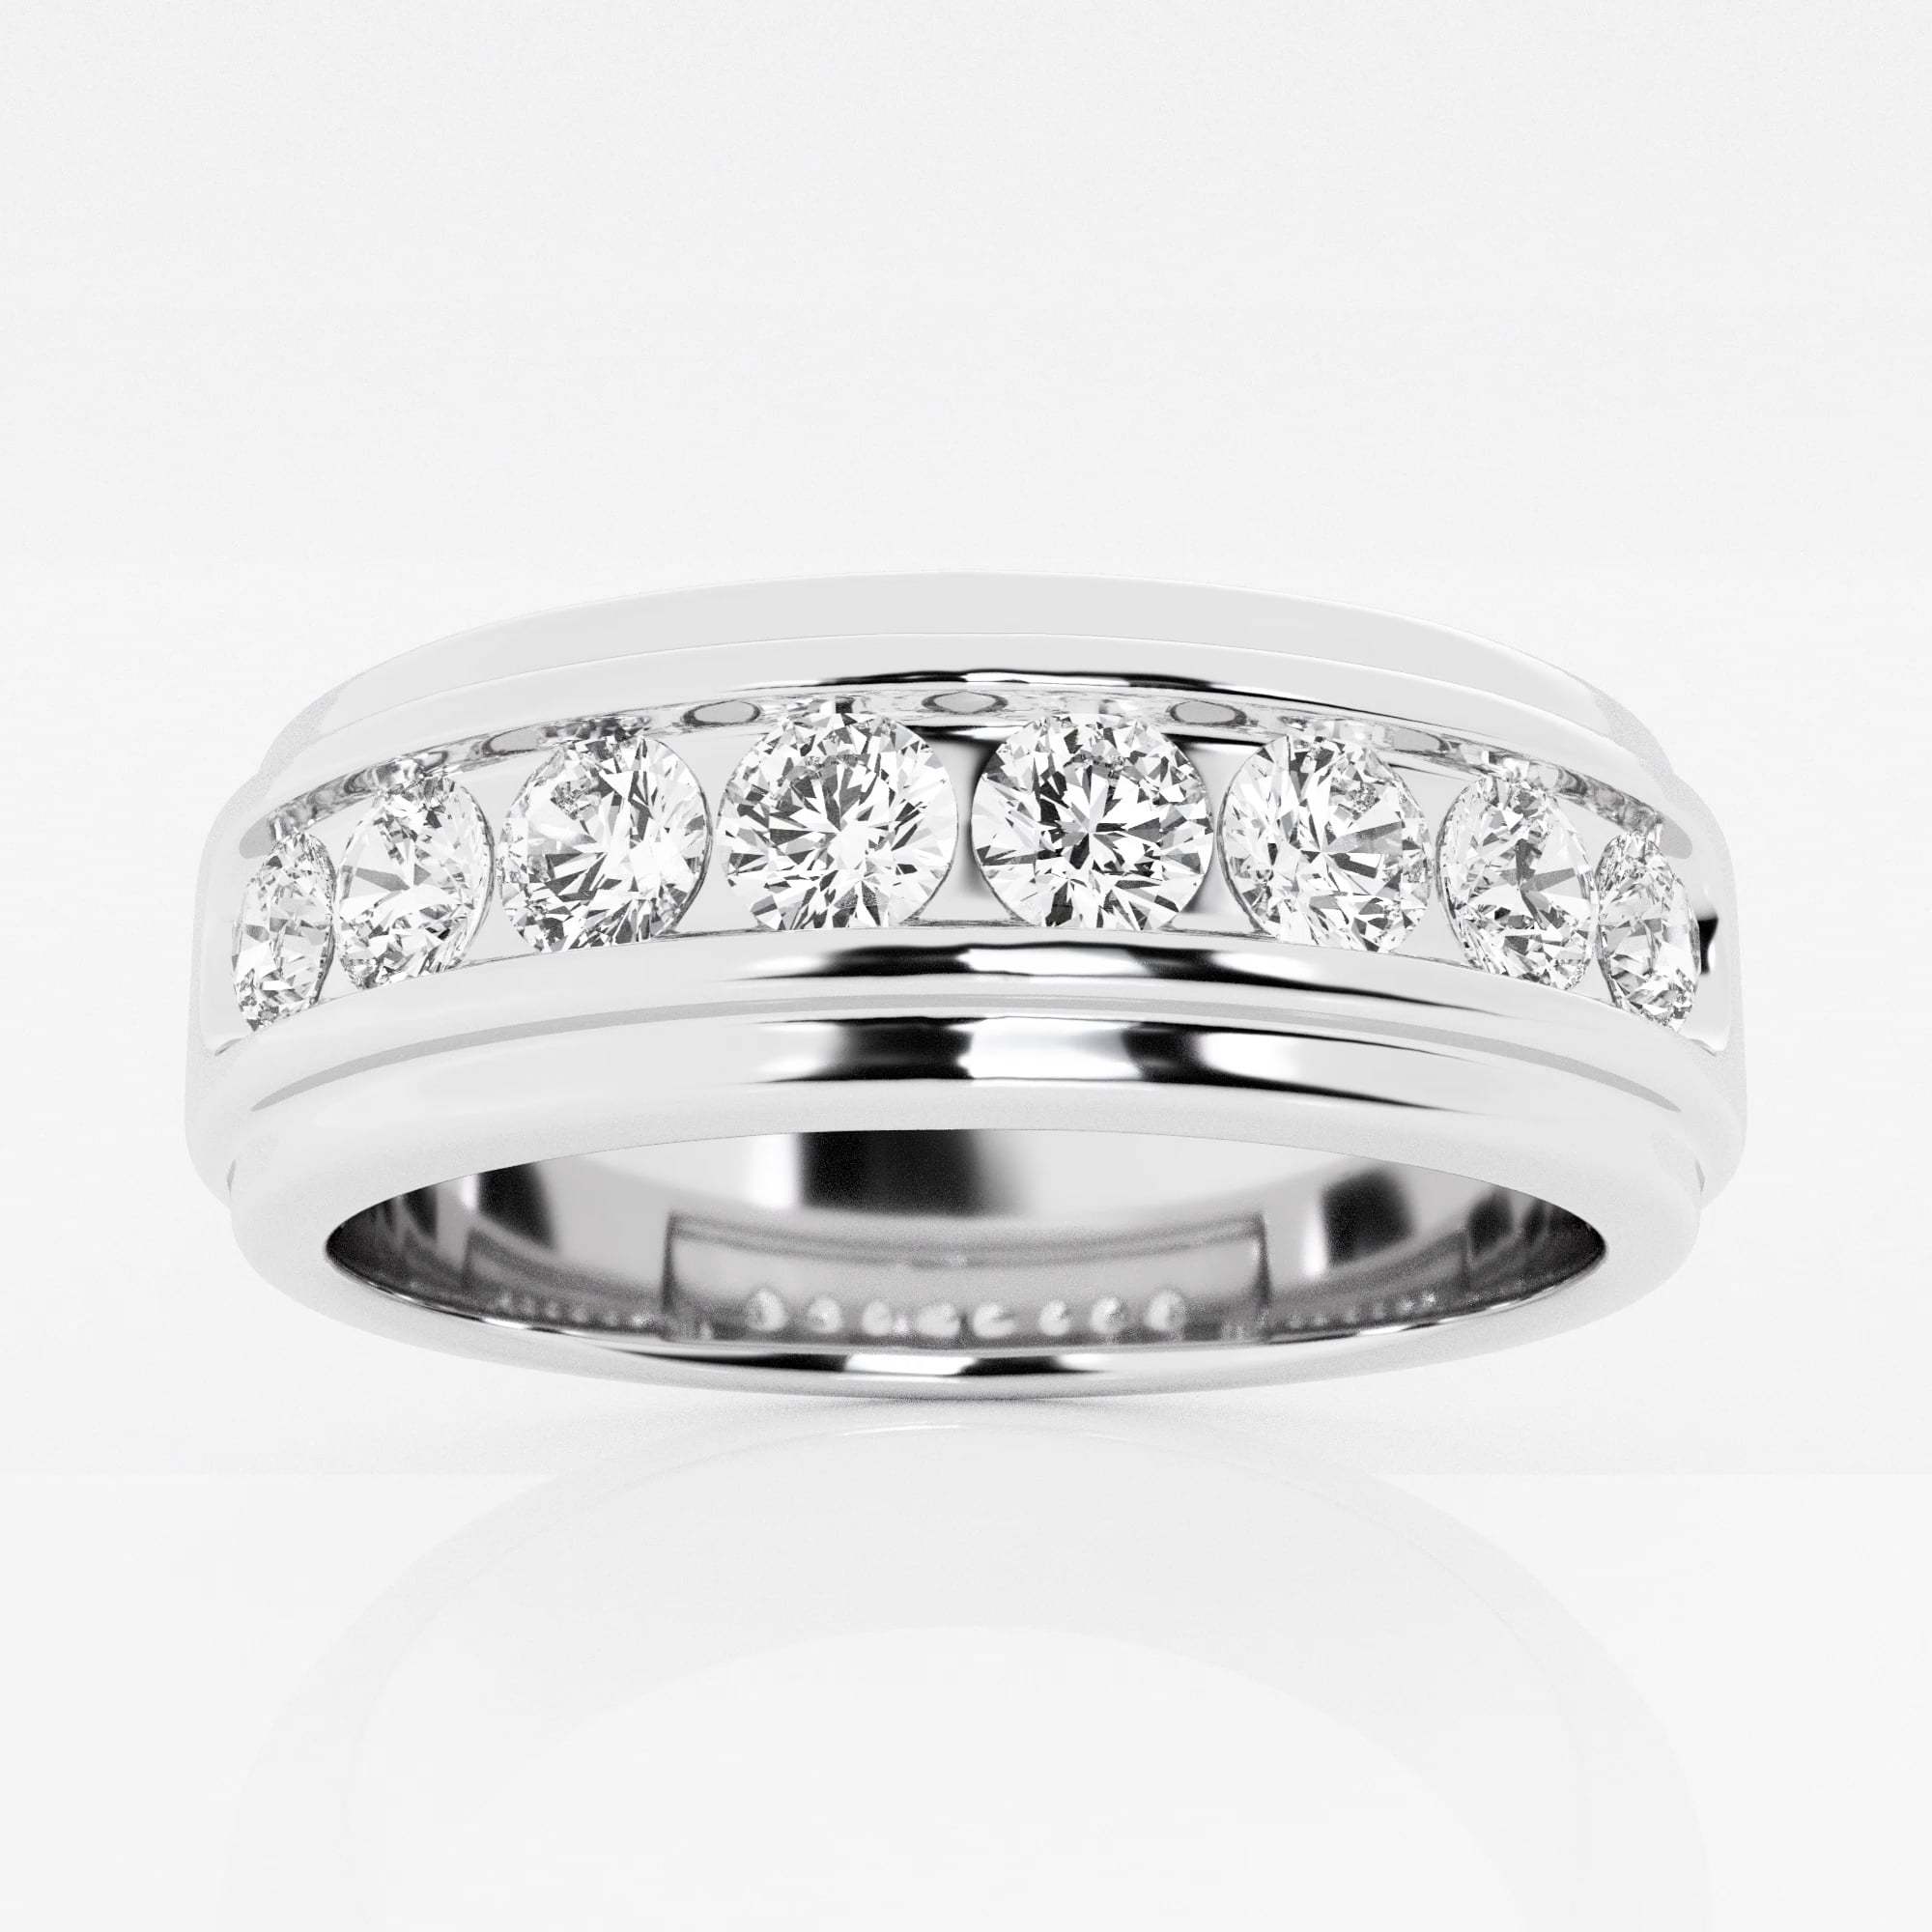 Diamond Channel Set Wedding Band Ring For Men In 14kt. White Gold (1.05ct.)